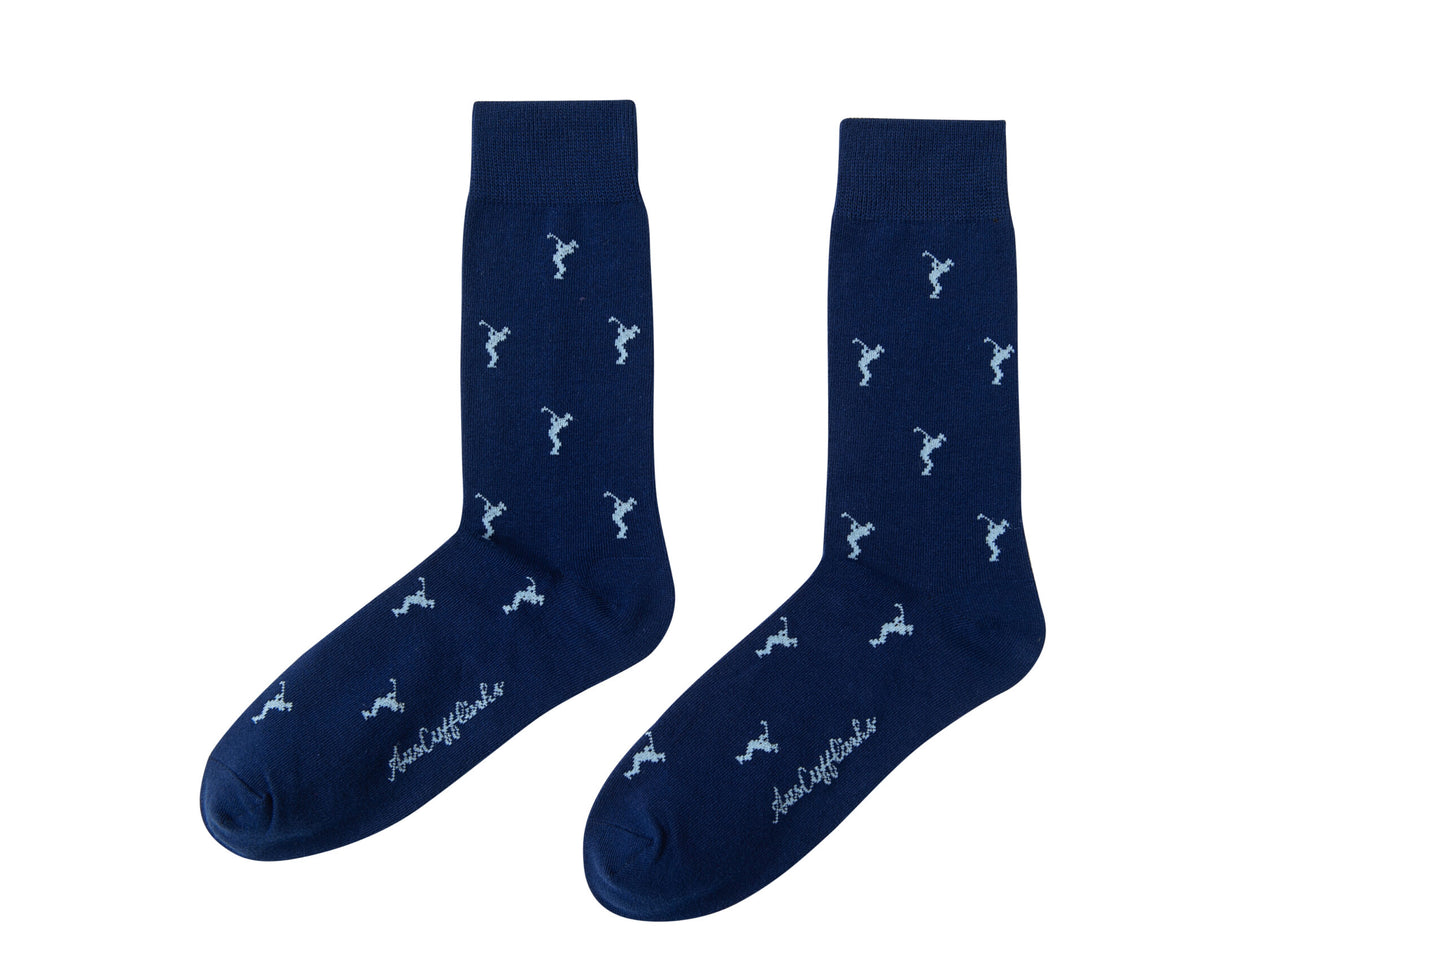 A pair of Golf Swing Blue Socks with white birds on them.